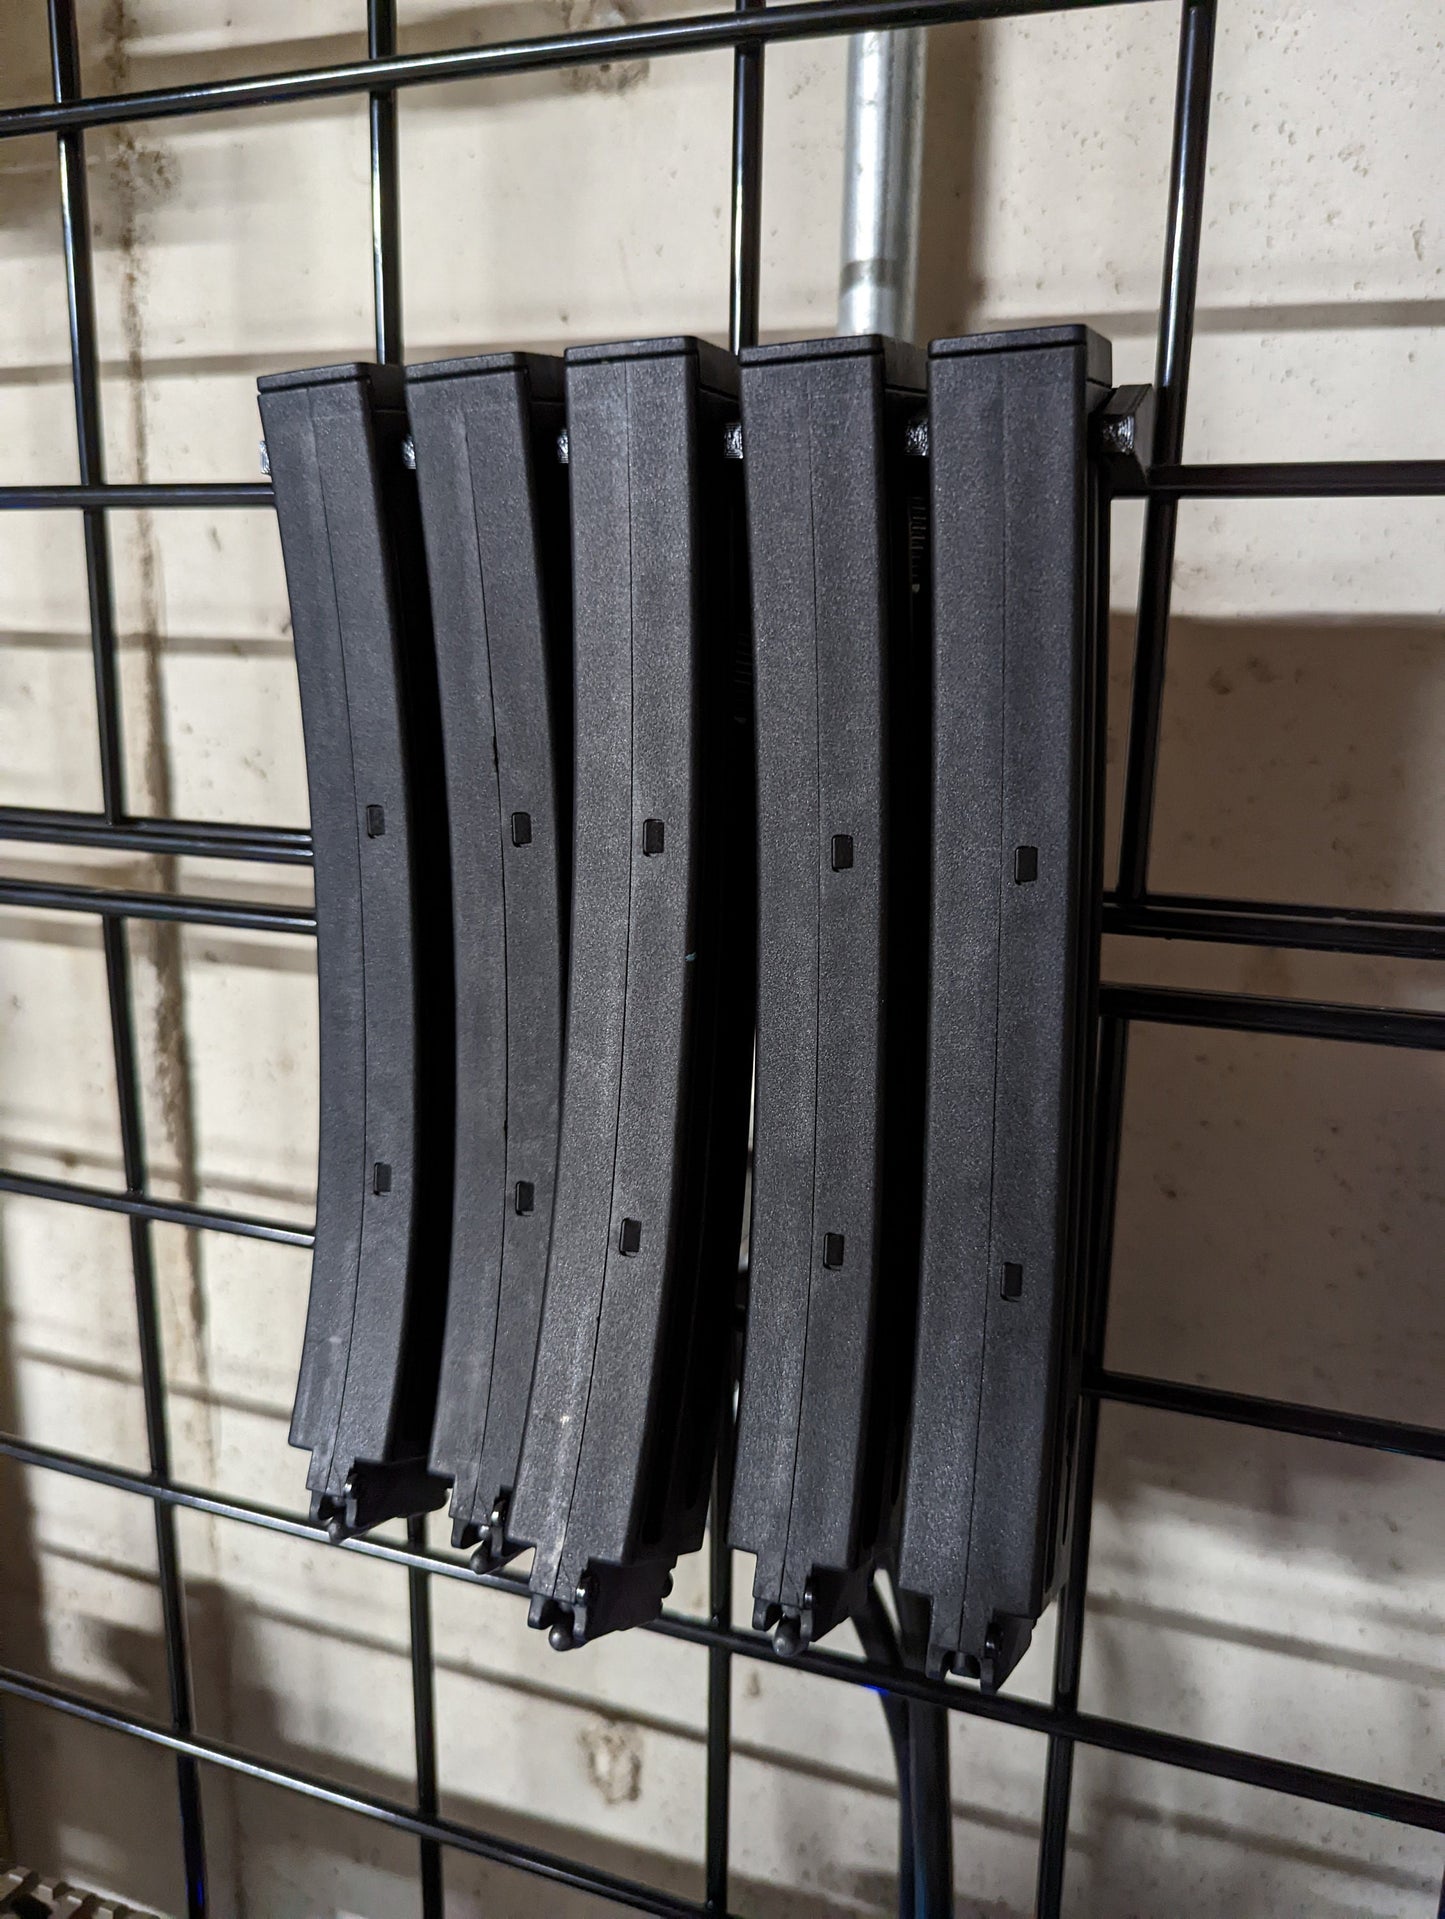 Mount for HK MP5 22 Mags - Gridwall | Magazine Holder Storage Rack